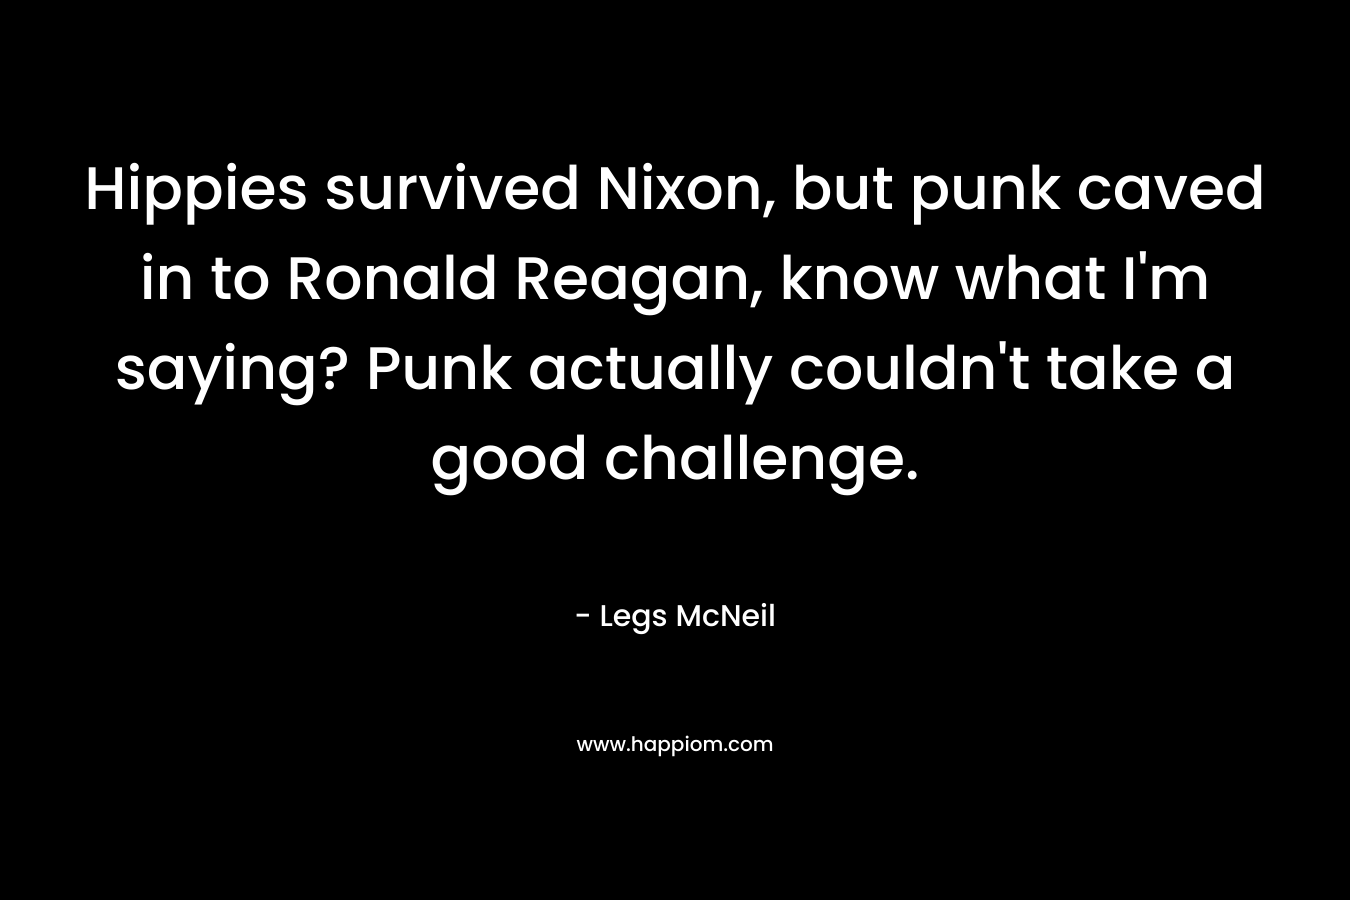 Hippies survived Nixon, but punk caved in to Ronald Reagan, know what I’m saying? Punk actually couldn’t take a good challenge. – Legs McNeil